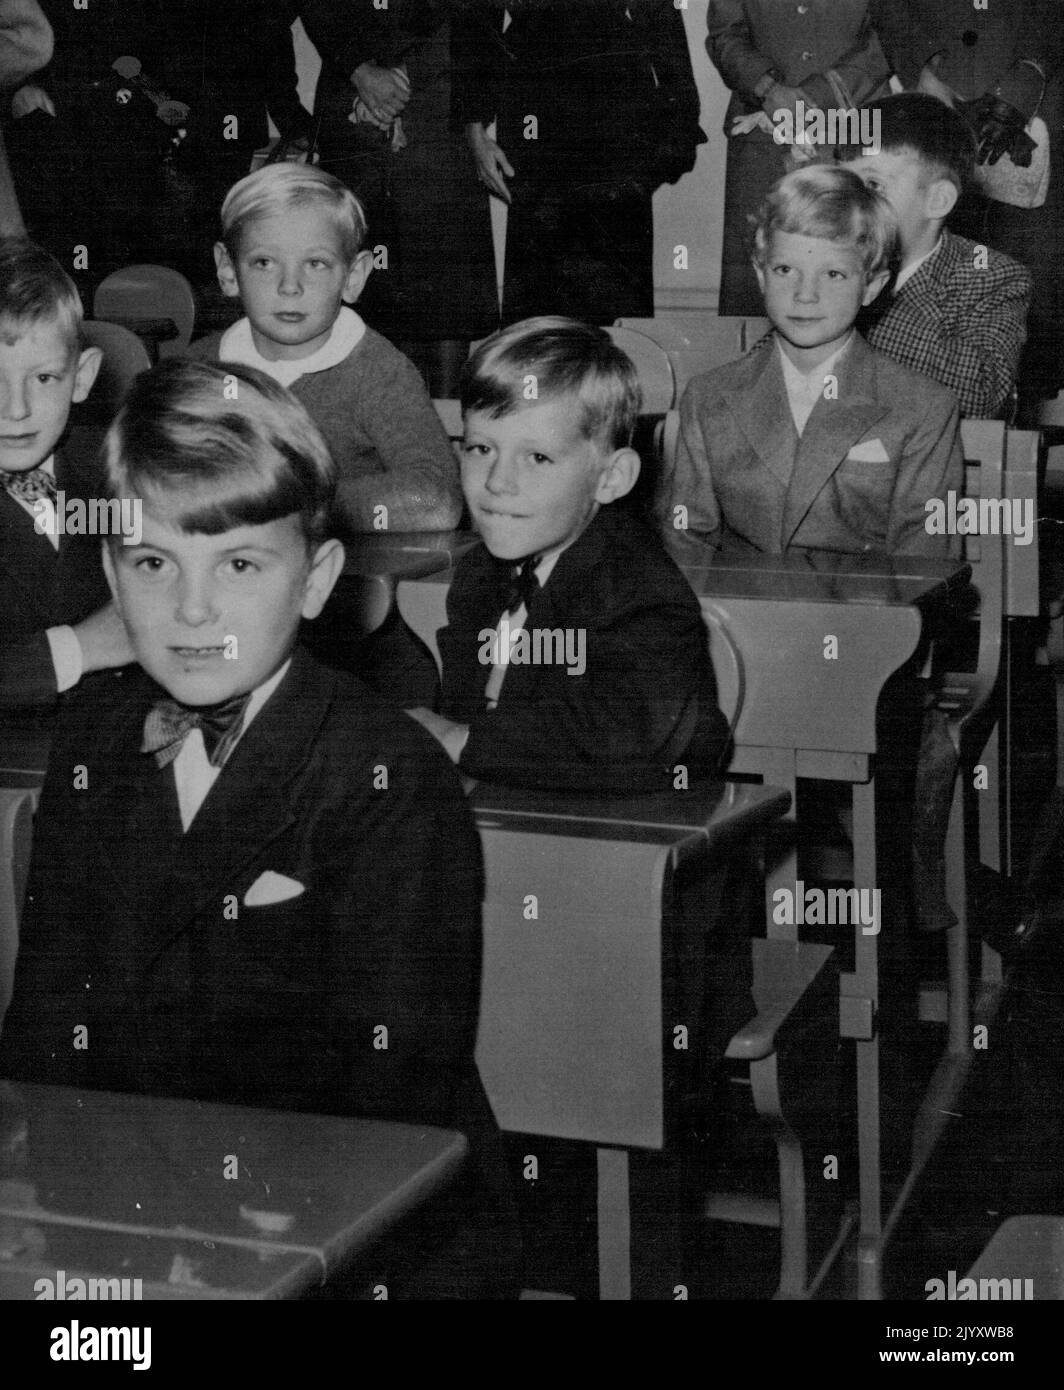 Swedish Crown Prince Starts School On September 8th the Swedish Crown prince Carl Gustaf took another step in life. He left kindergarten and went to school. At the age of seven he sits with nineteen other Boys in a classroom just like other Swedish boys of his age. He is seen here, Third from the front, in the school Classroom with his future school chums. In Front of him second from front sits Hans Jorgen Zetterstrom, son of ' Kar de Mumma' A well known Swedish Writer. November 2, 1953. (Photo by Associated Press Photo) Stock Photo